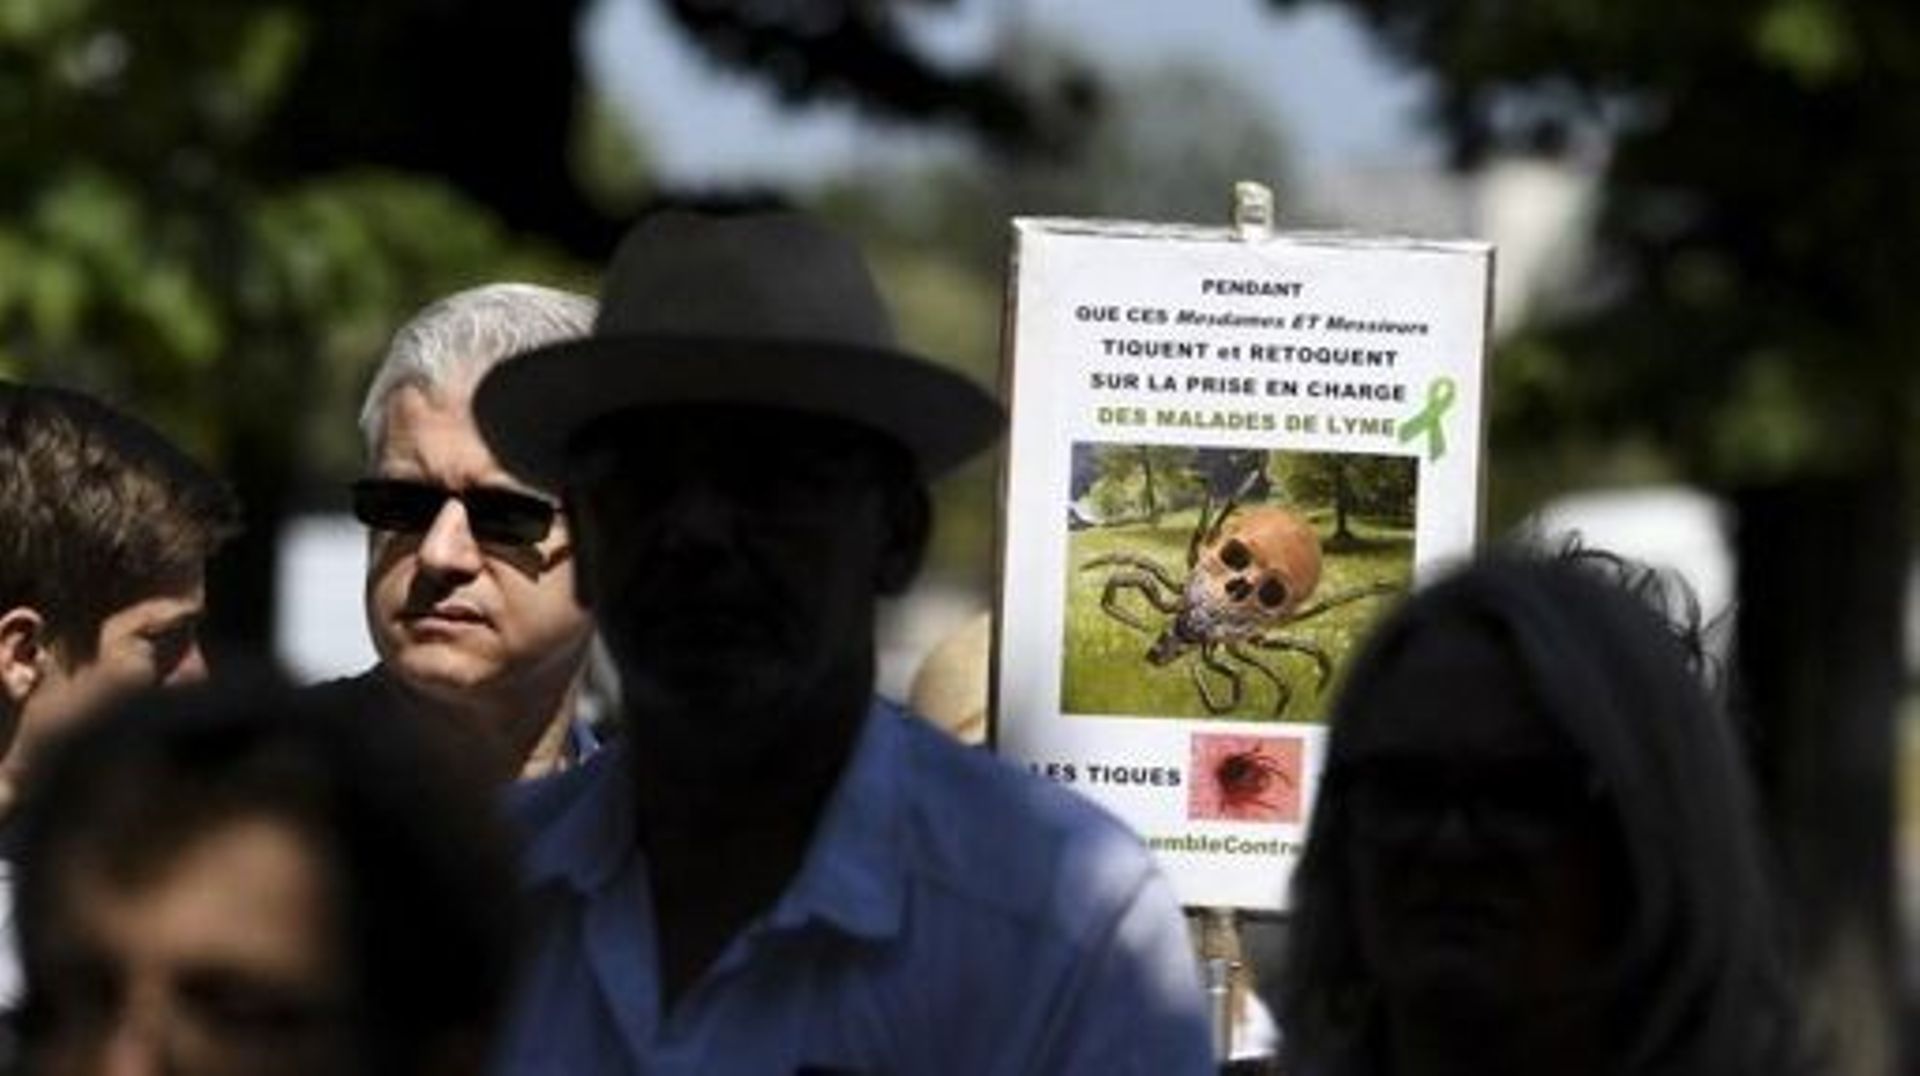 Demonstrators take part in a gathering called by the Together against Lyme movement, asking for a better recognition of the Lyme disease by the French Government, on July 3, 2019, in Paris. Demonstrators asked for concrete solutions and deplored the lack 